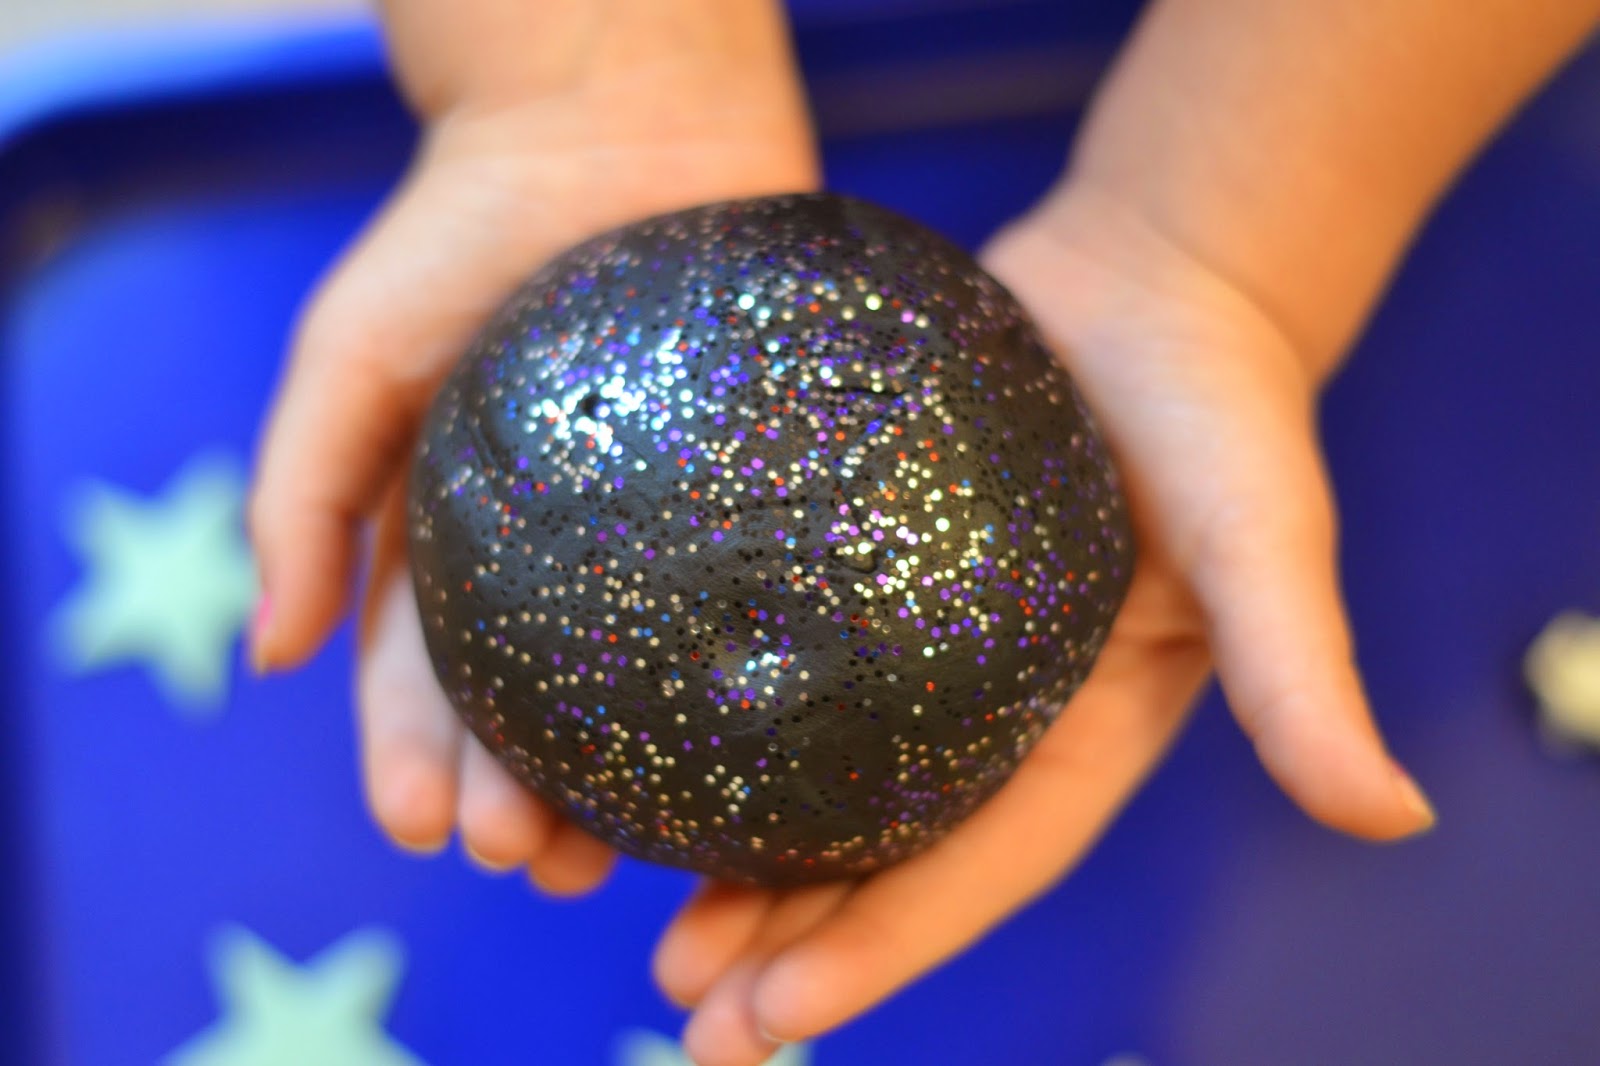 GALAXY DOUGH is super smooth, ultra sparkly, & really stretchy.  This no cook recipe takes seconds to make & is so FUN!  My kids played four hours!